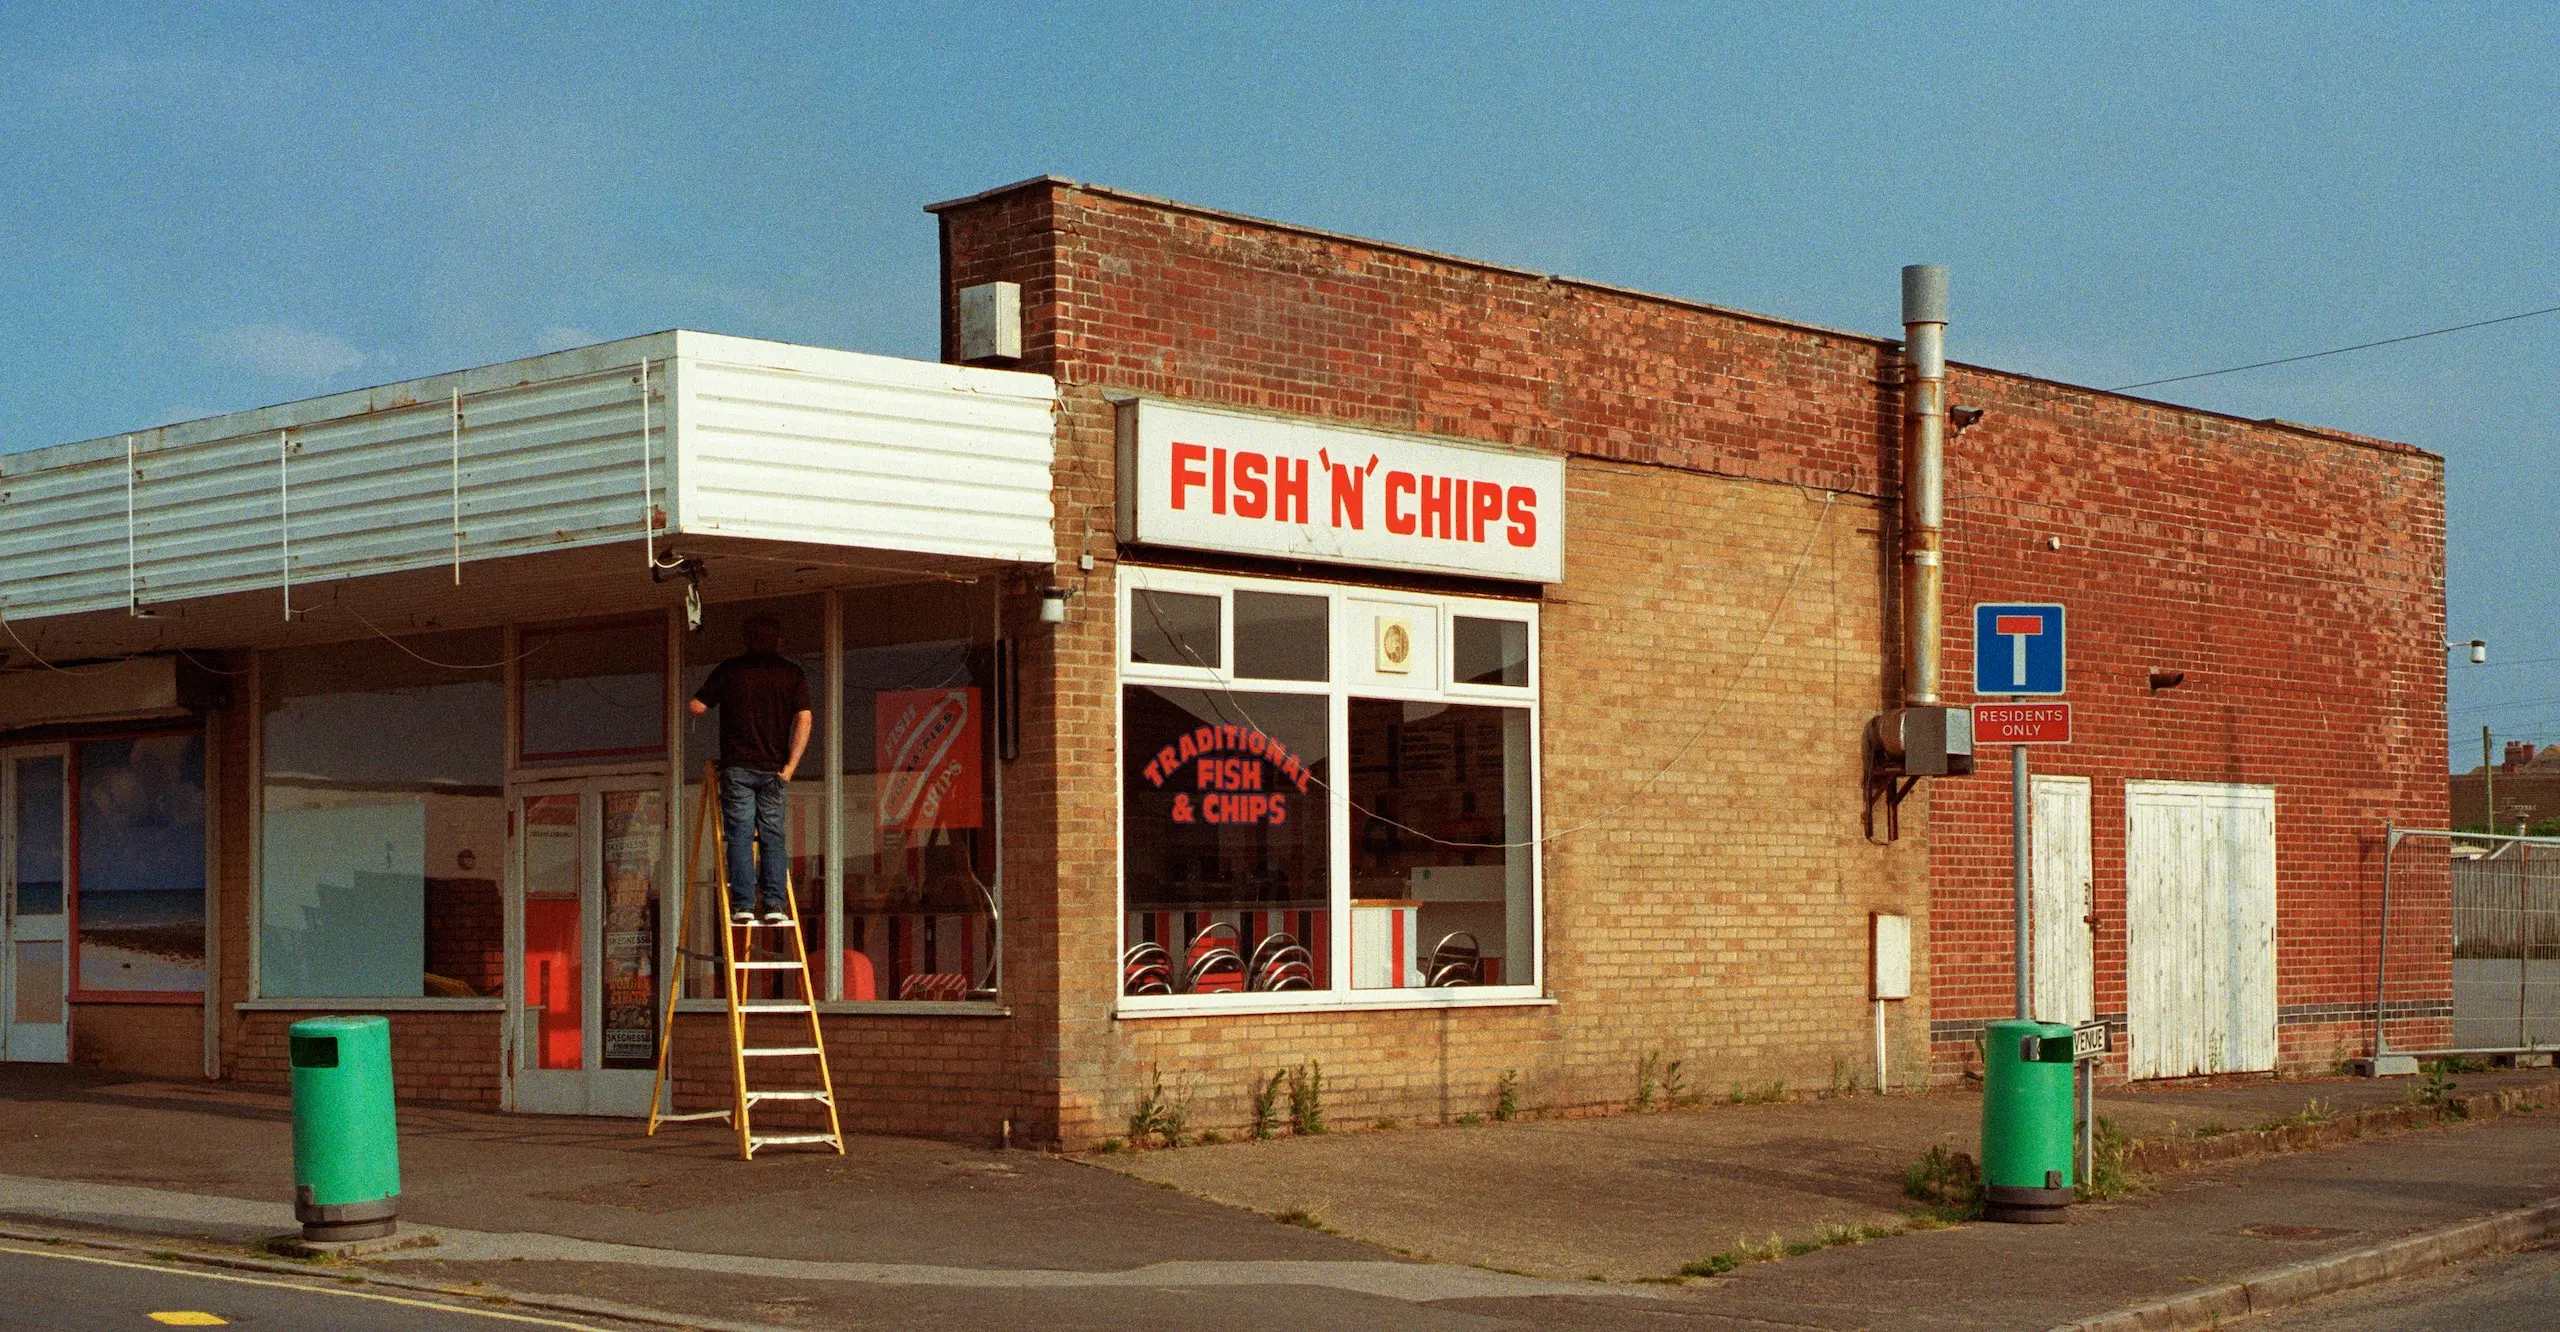 A colour photograph of a street corner fish and chip shop with a bright blue sky behind.